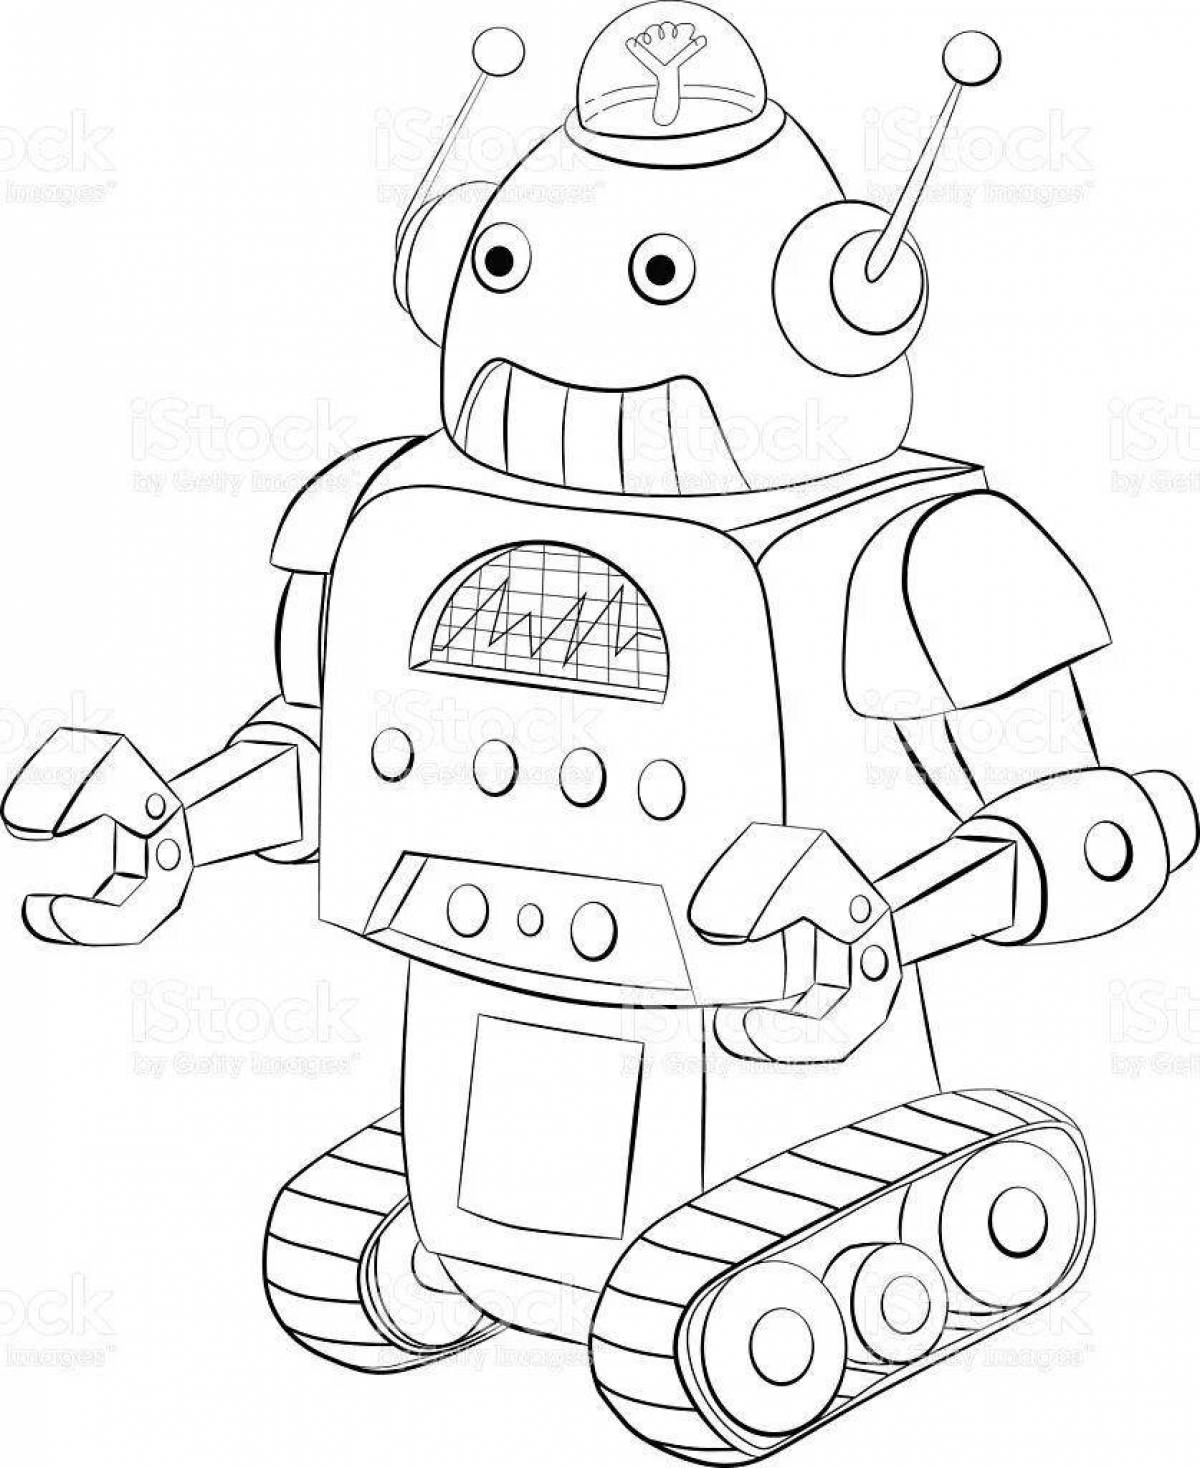 Color-frenzy robot sun coloring page